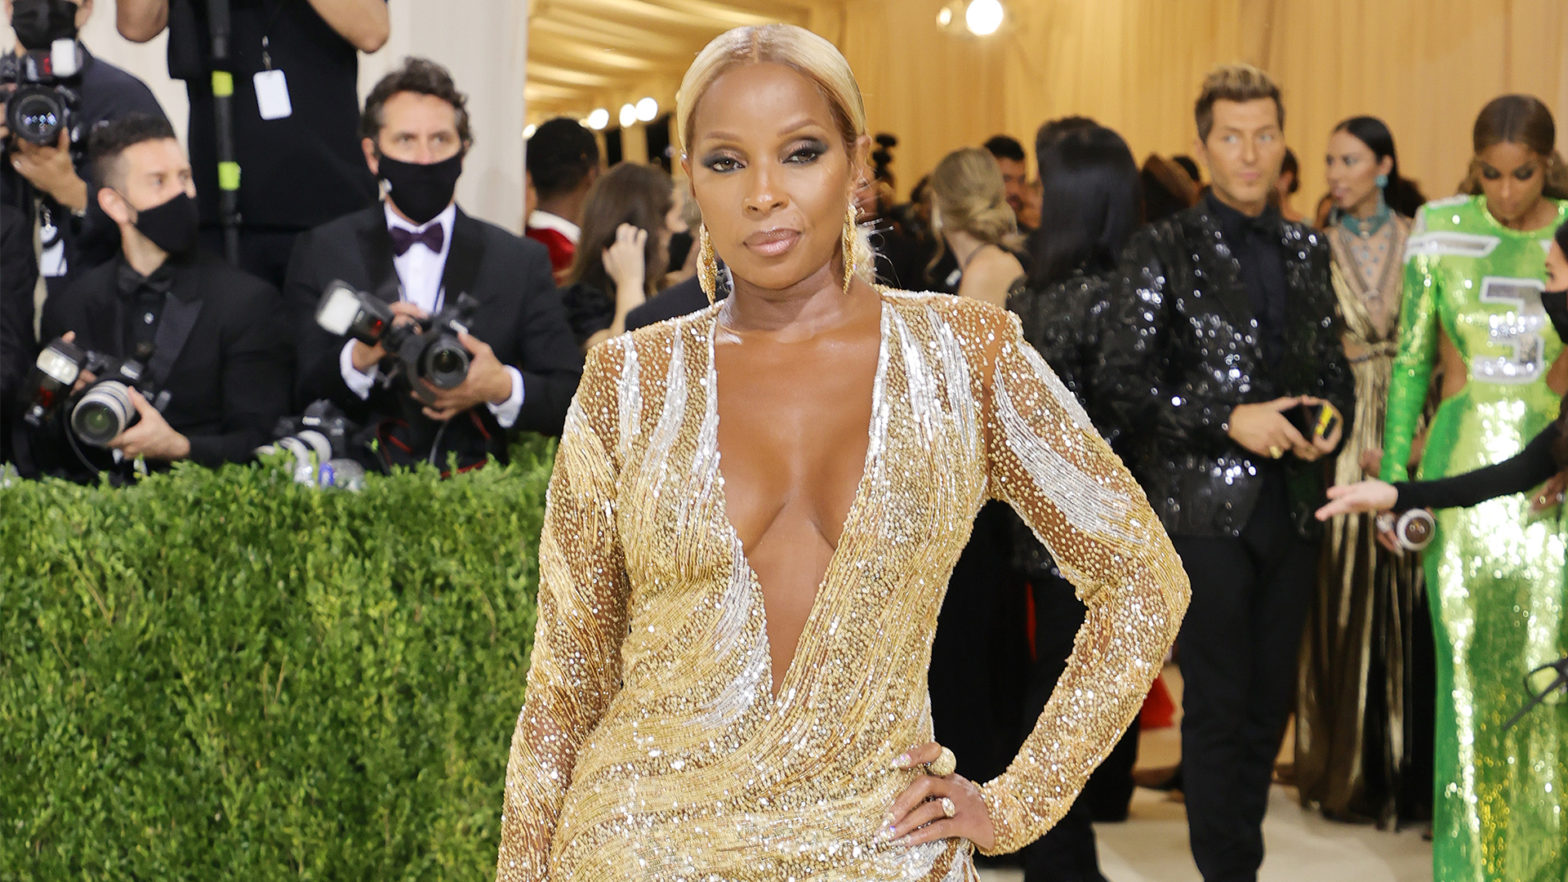 Mary J. Blige’s Tour Partners With Medical Tech Company Hologic To Raise Health Awareness For Black Women